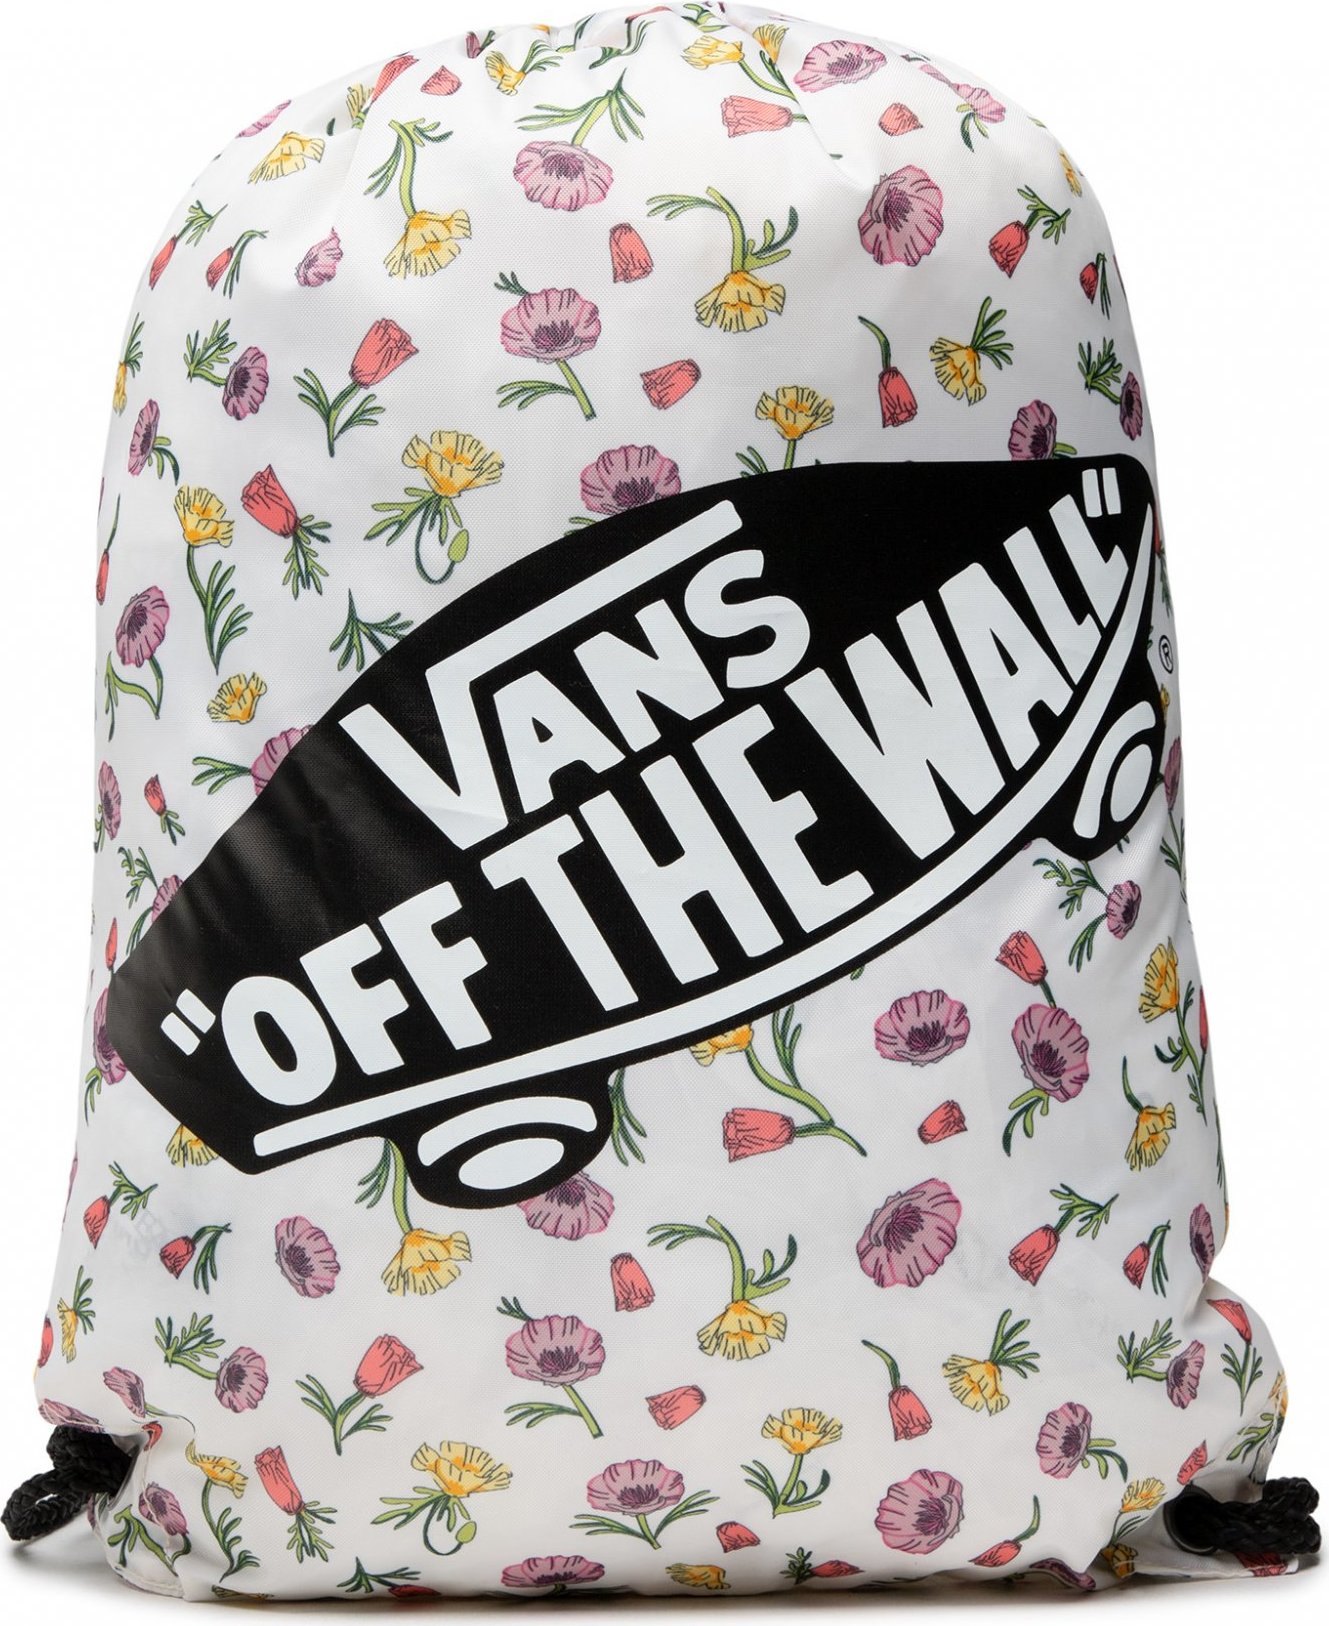 Vans Wm Benched Bag VN000SUFY0E1